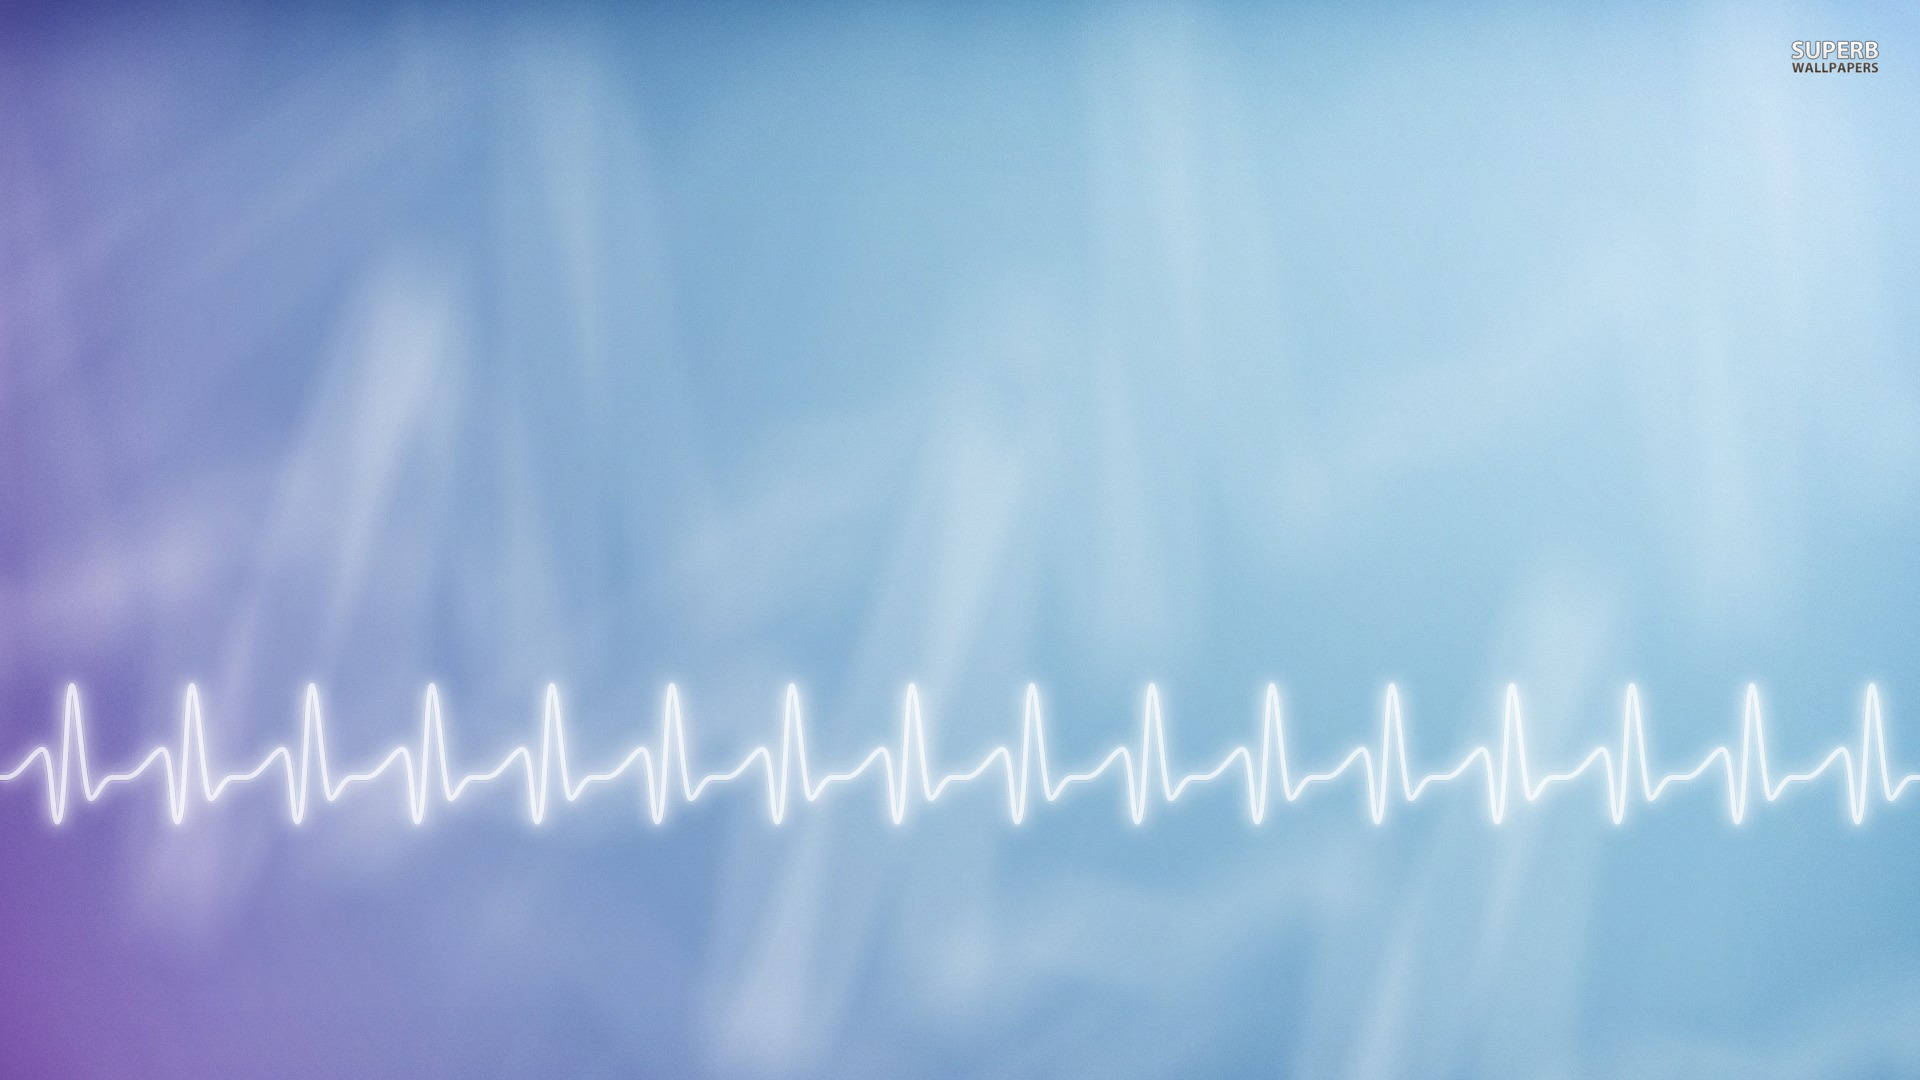 Heartbeat Abstract Gradient Wallpaper